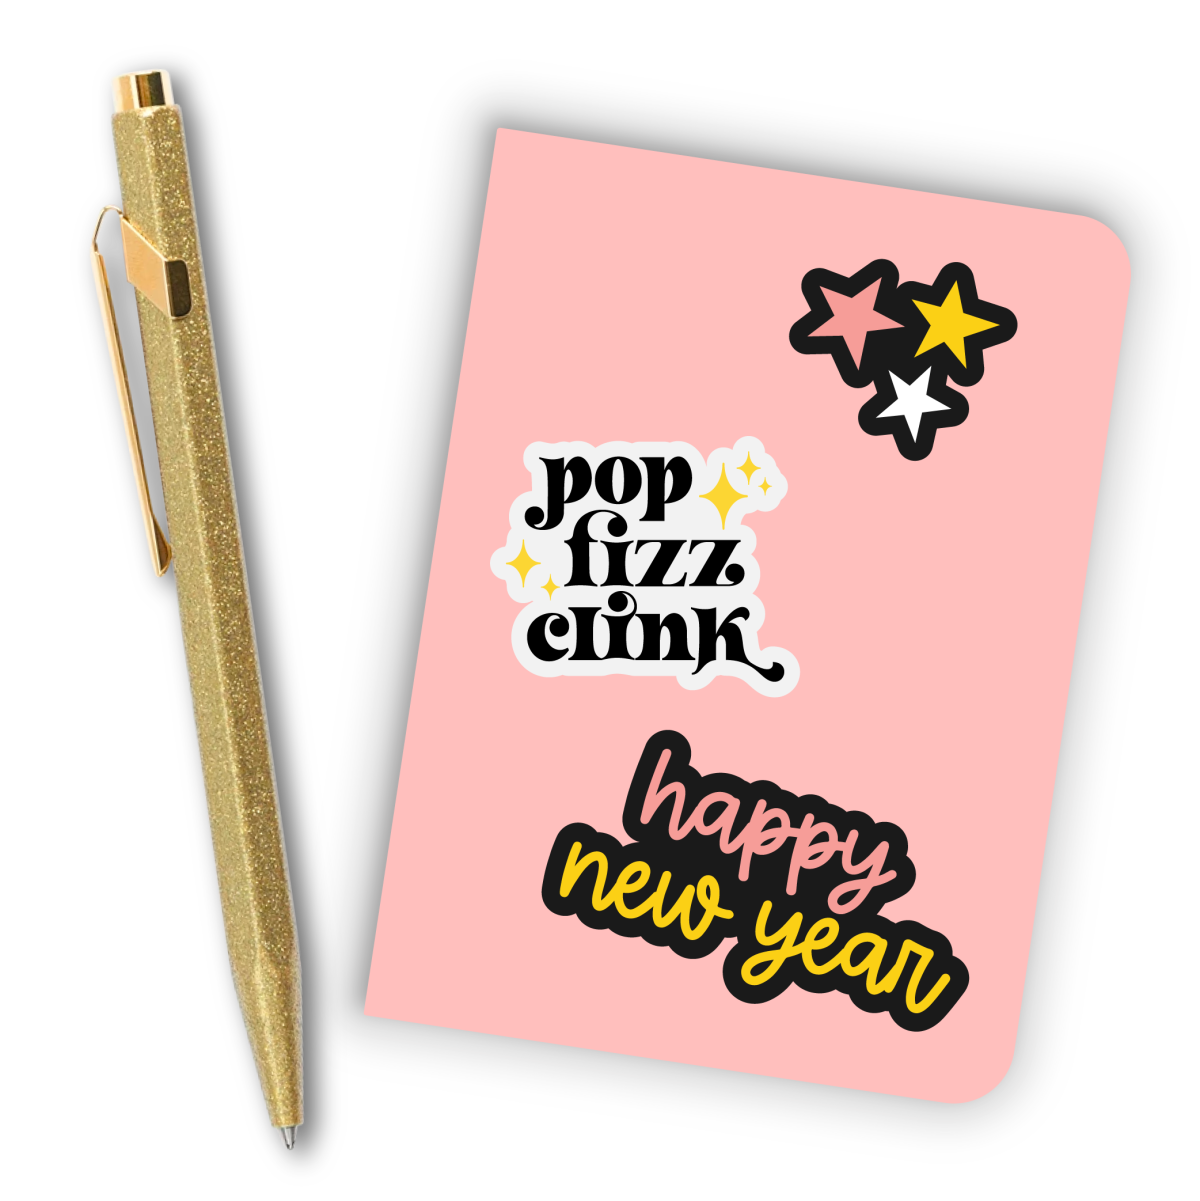 New Year's Eve stickers on notebook